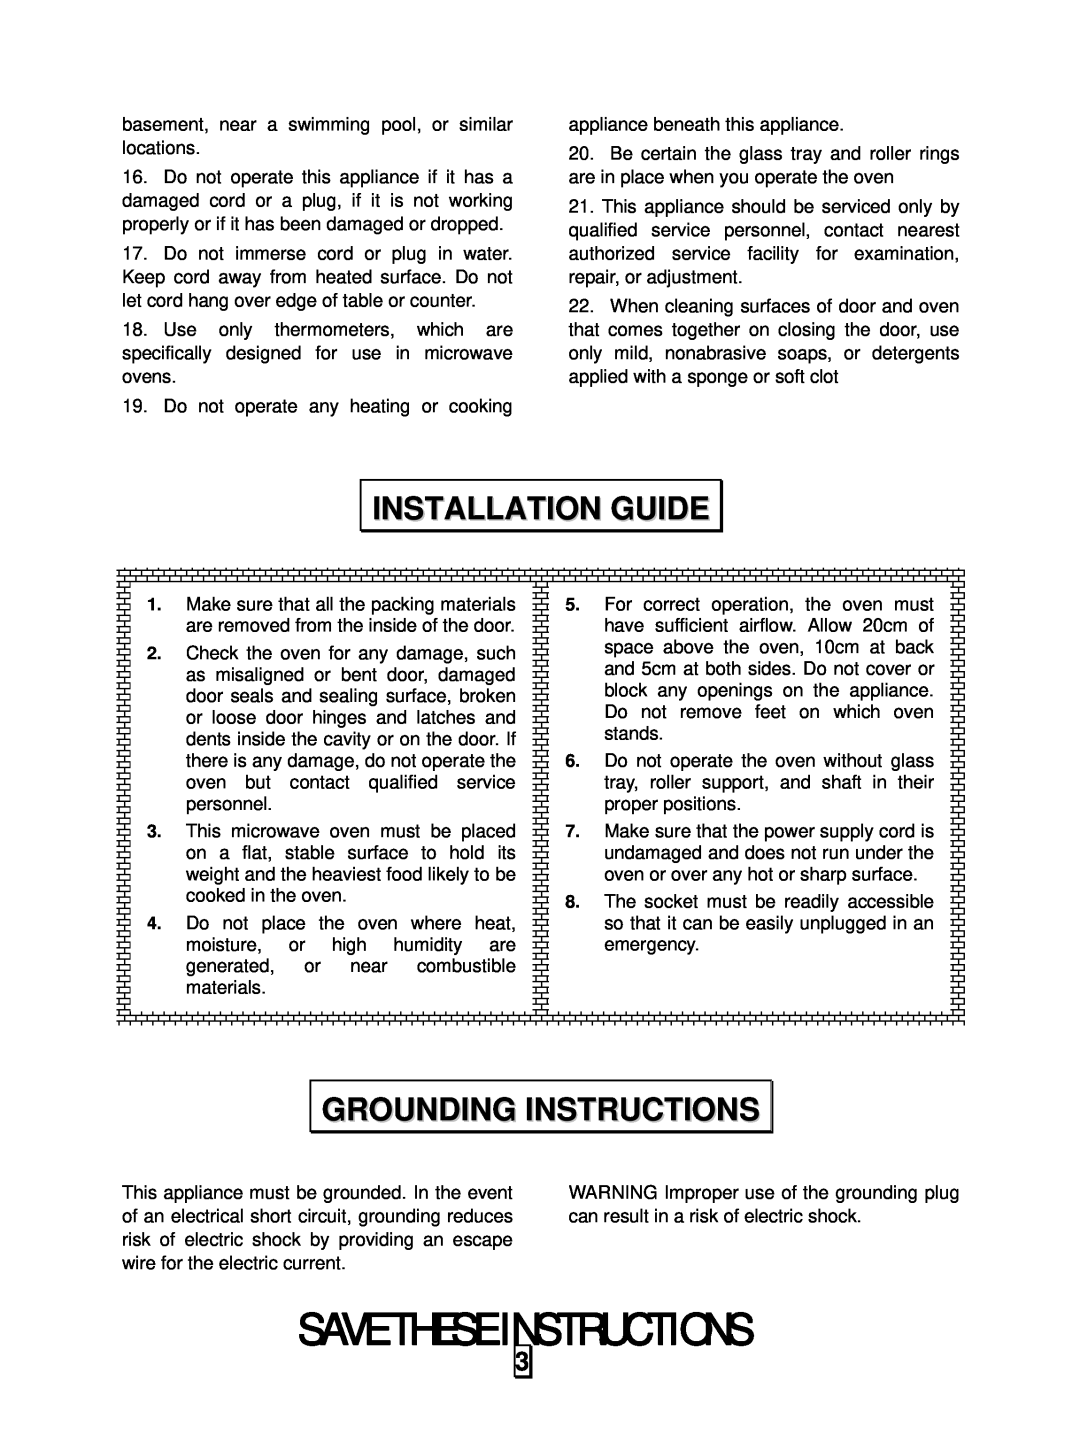 RCA RMW948 owner manual Installation Guide, Grounding Instructions, Save These Instructions 